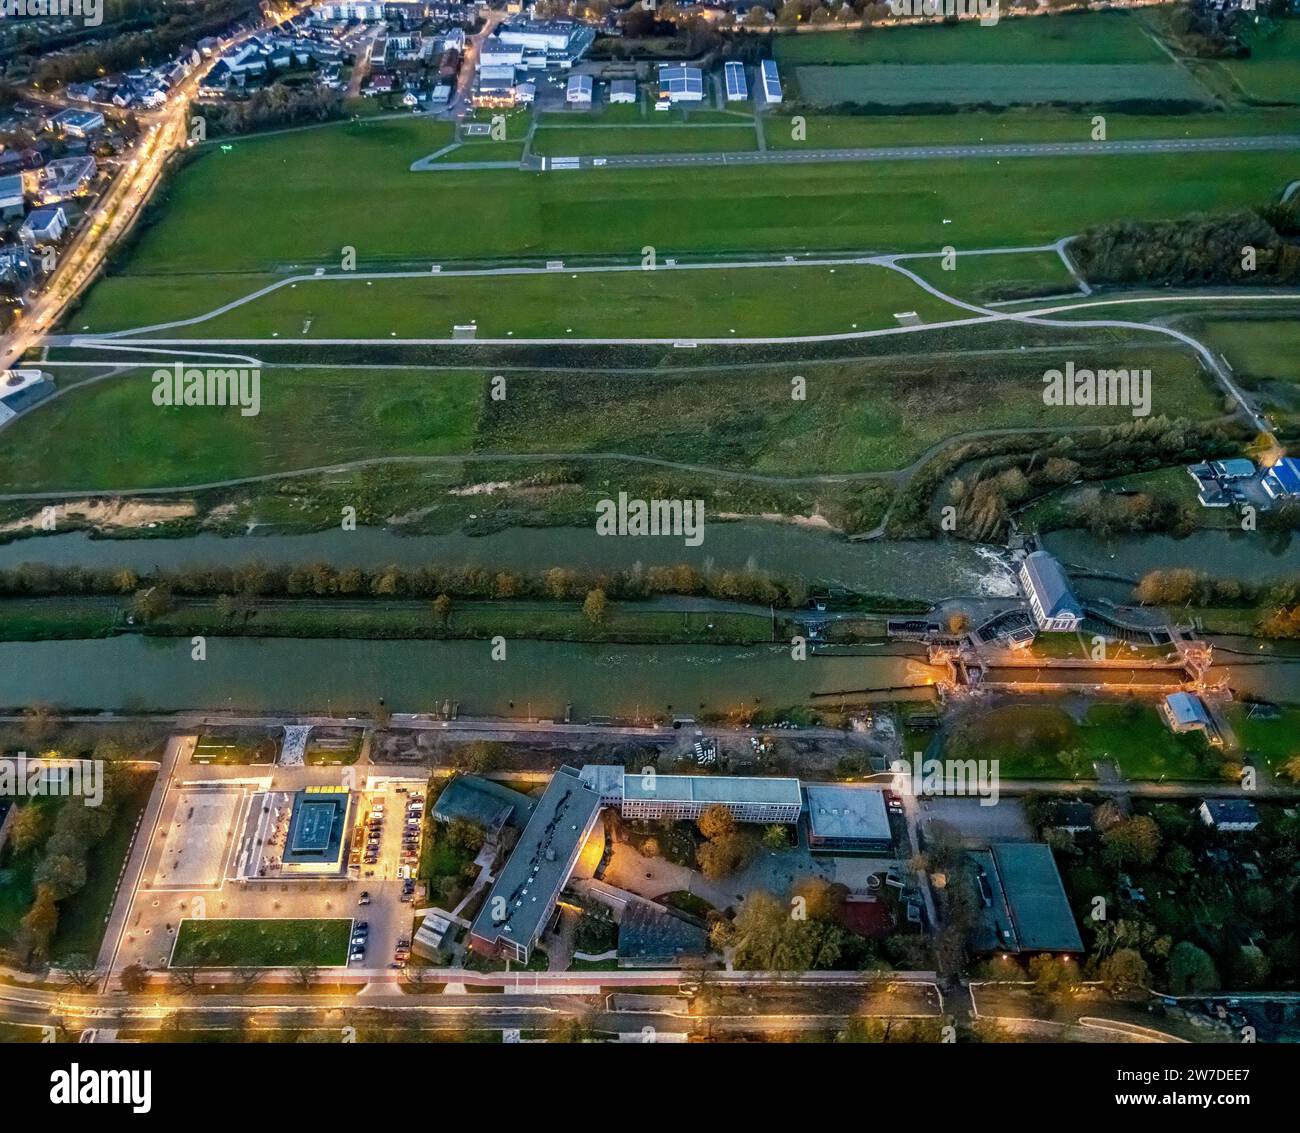 Aerial view, Hammonense grammar school and Adenauerallee water sports center, Lippewiese recreational area and airport on the Datteln-Hamm Canal, Hees Stock Photo